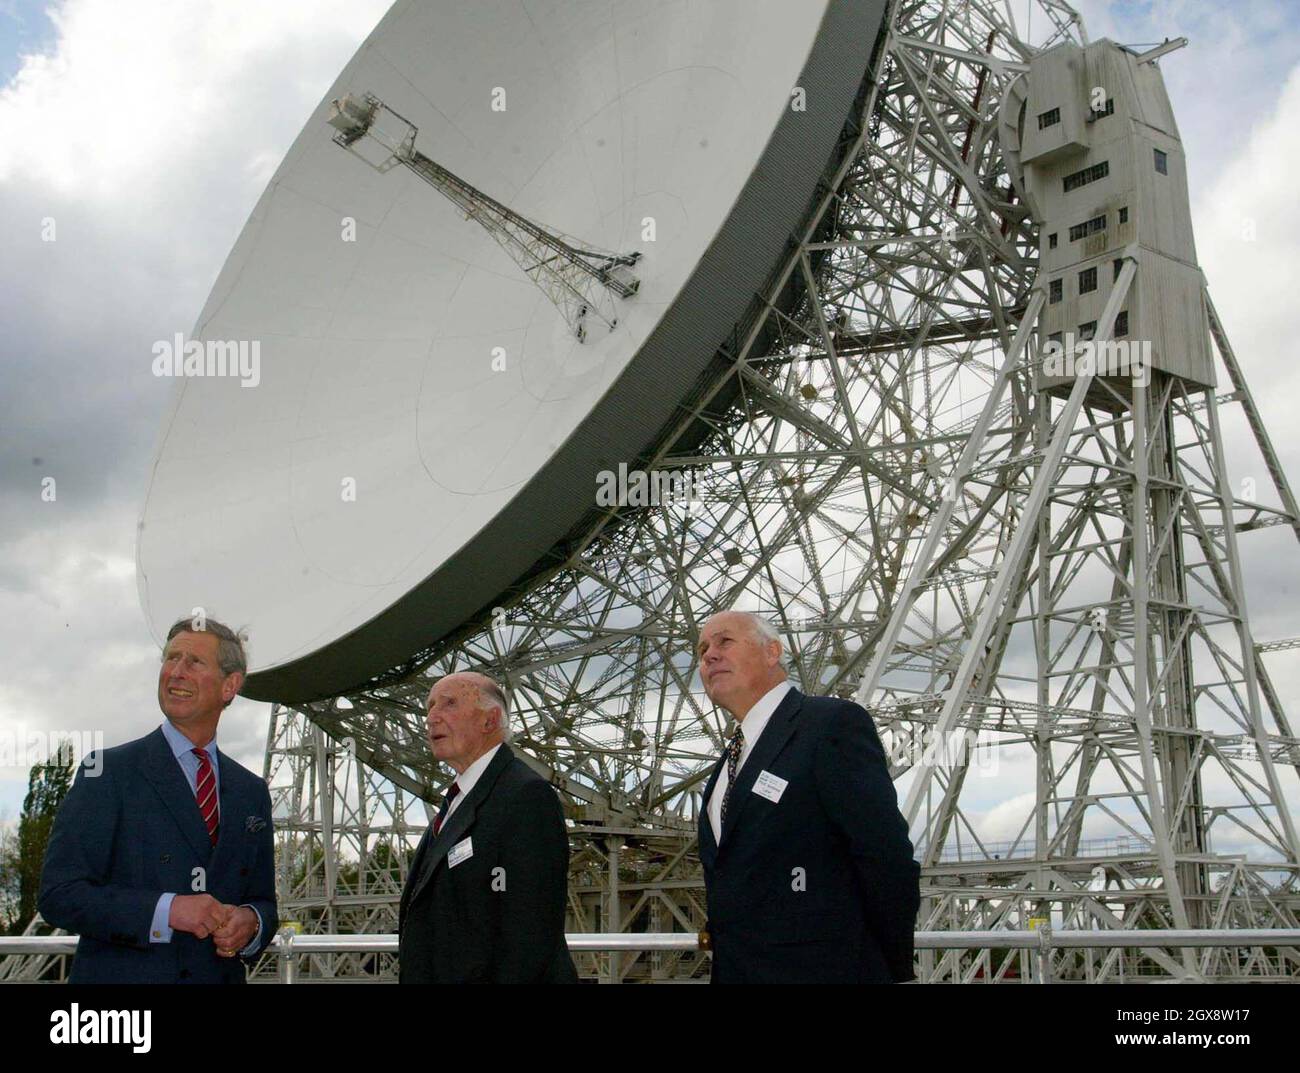 The Prince of Wales speaks with Sir Bernard Lovell (C) and Prof Andrew Lyne (R) during a visit to the Jodrell Bank Observatory in Cheshire. Half length, royals, suit  Â©Anwar Hussein/allaction.co.uk  Stock Photo